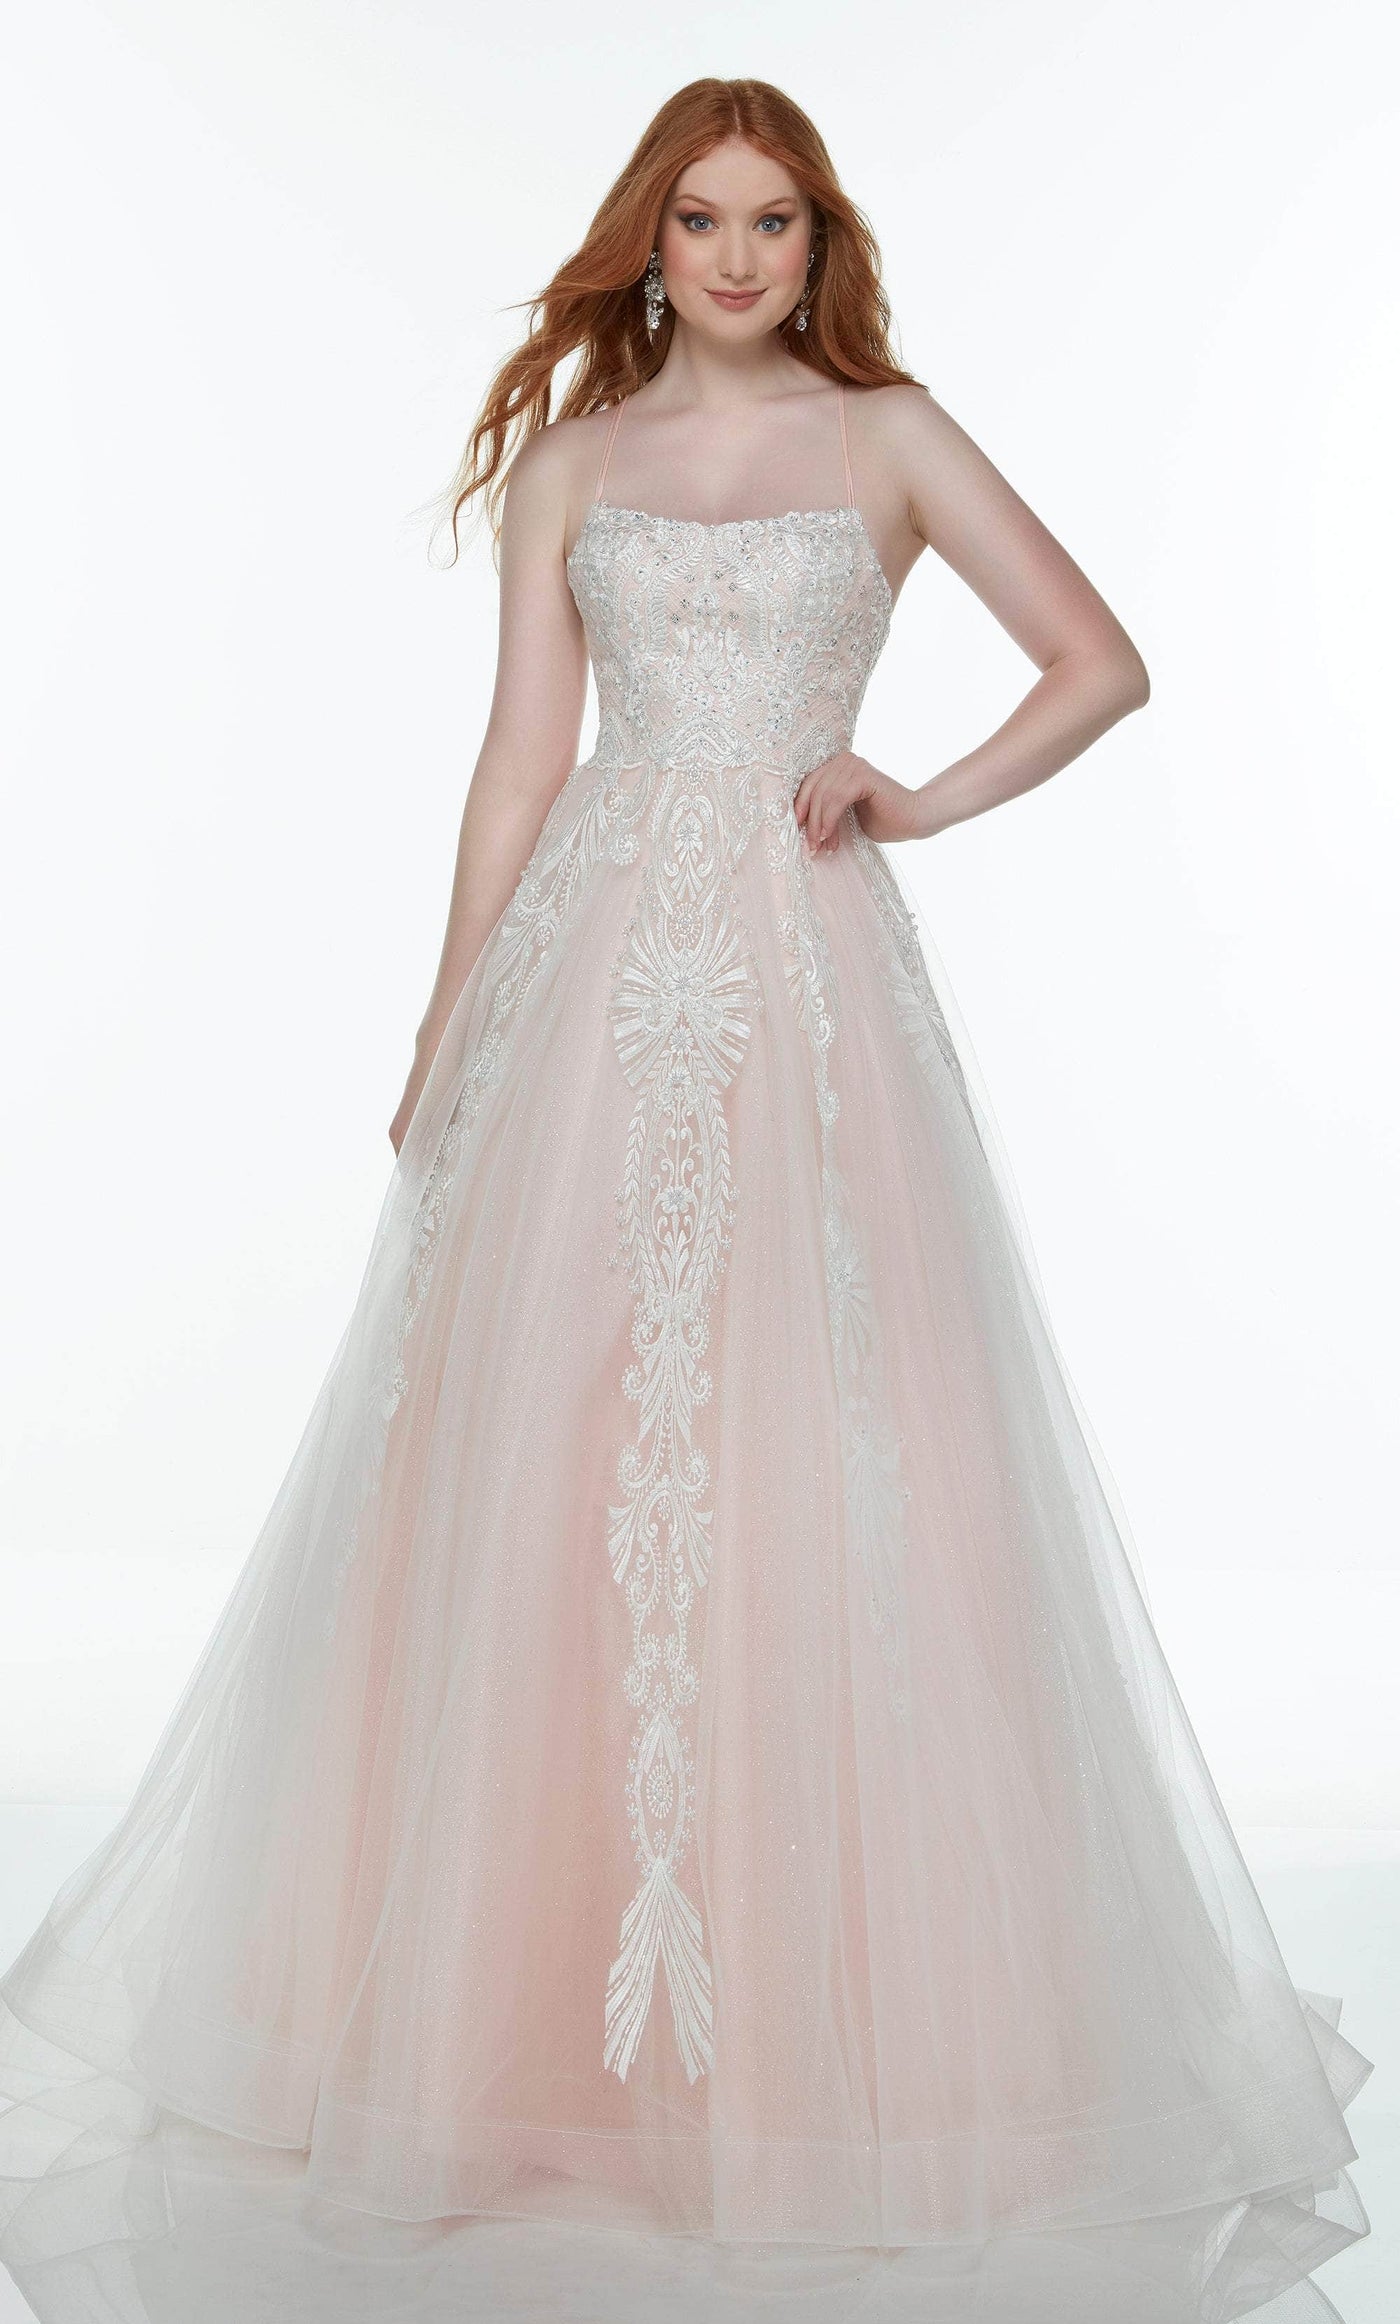 Alyce Paris 61084 - Floral Embroidered Tulle Ballgown Special Occasion Dress